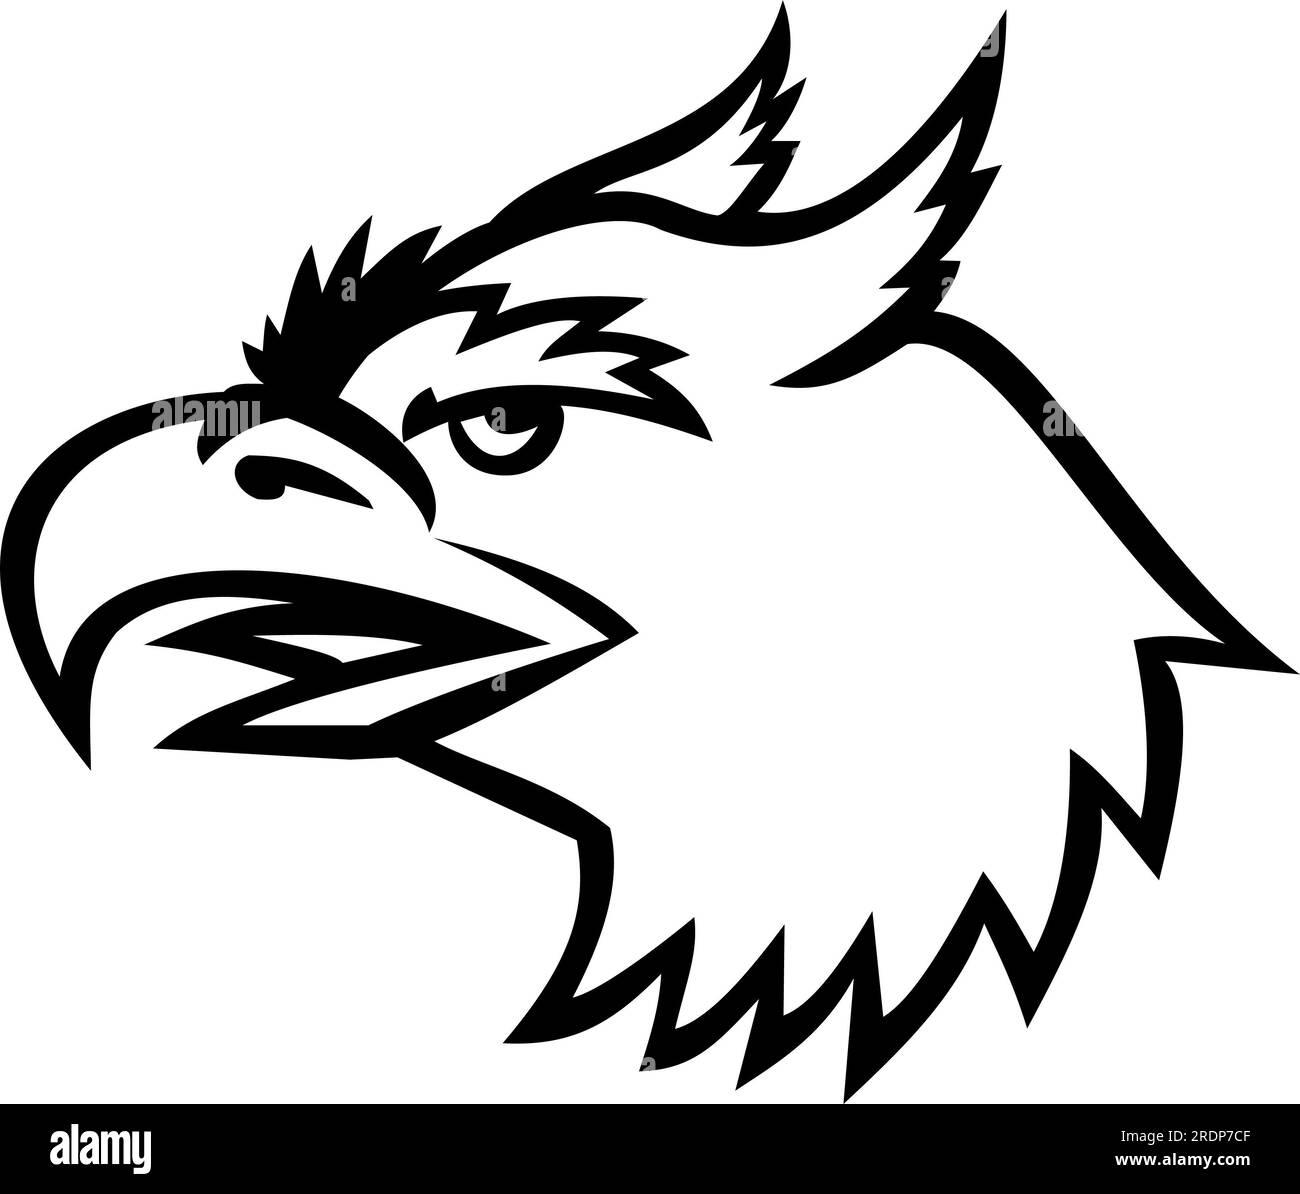 Mascot illustration of head of a head of a roc, an enormous legendary bird of prey in the popular mythology of the Middle East viewed from side on iso Stock Photo